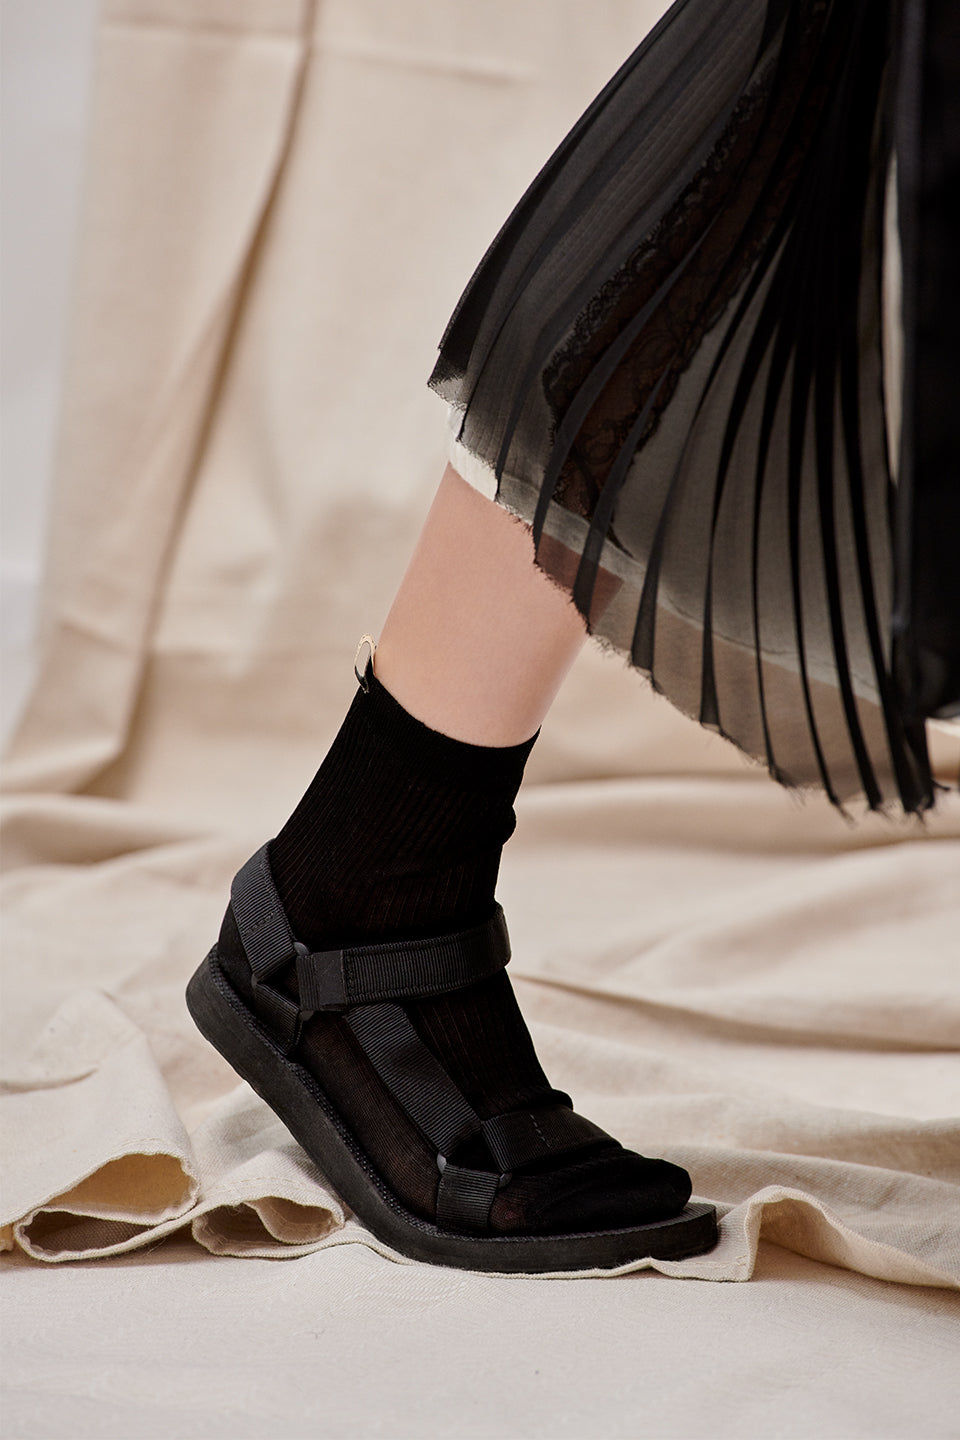 The Agnelli Sock in black with black velcro sandals and a sheer black pleated skirt